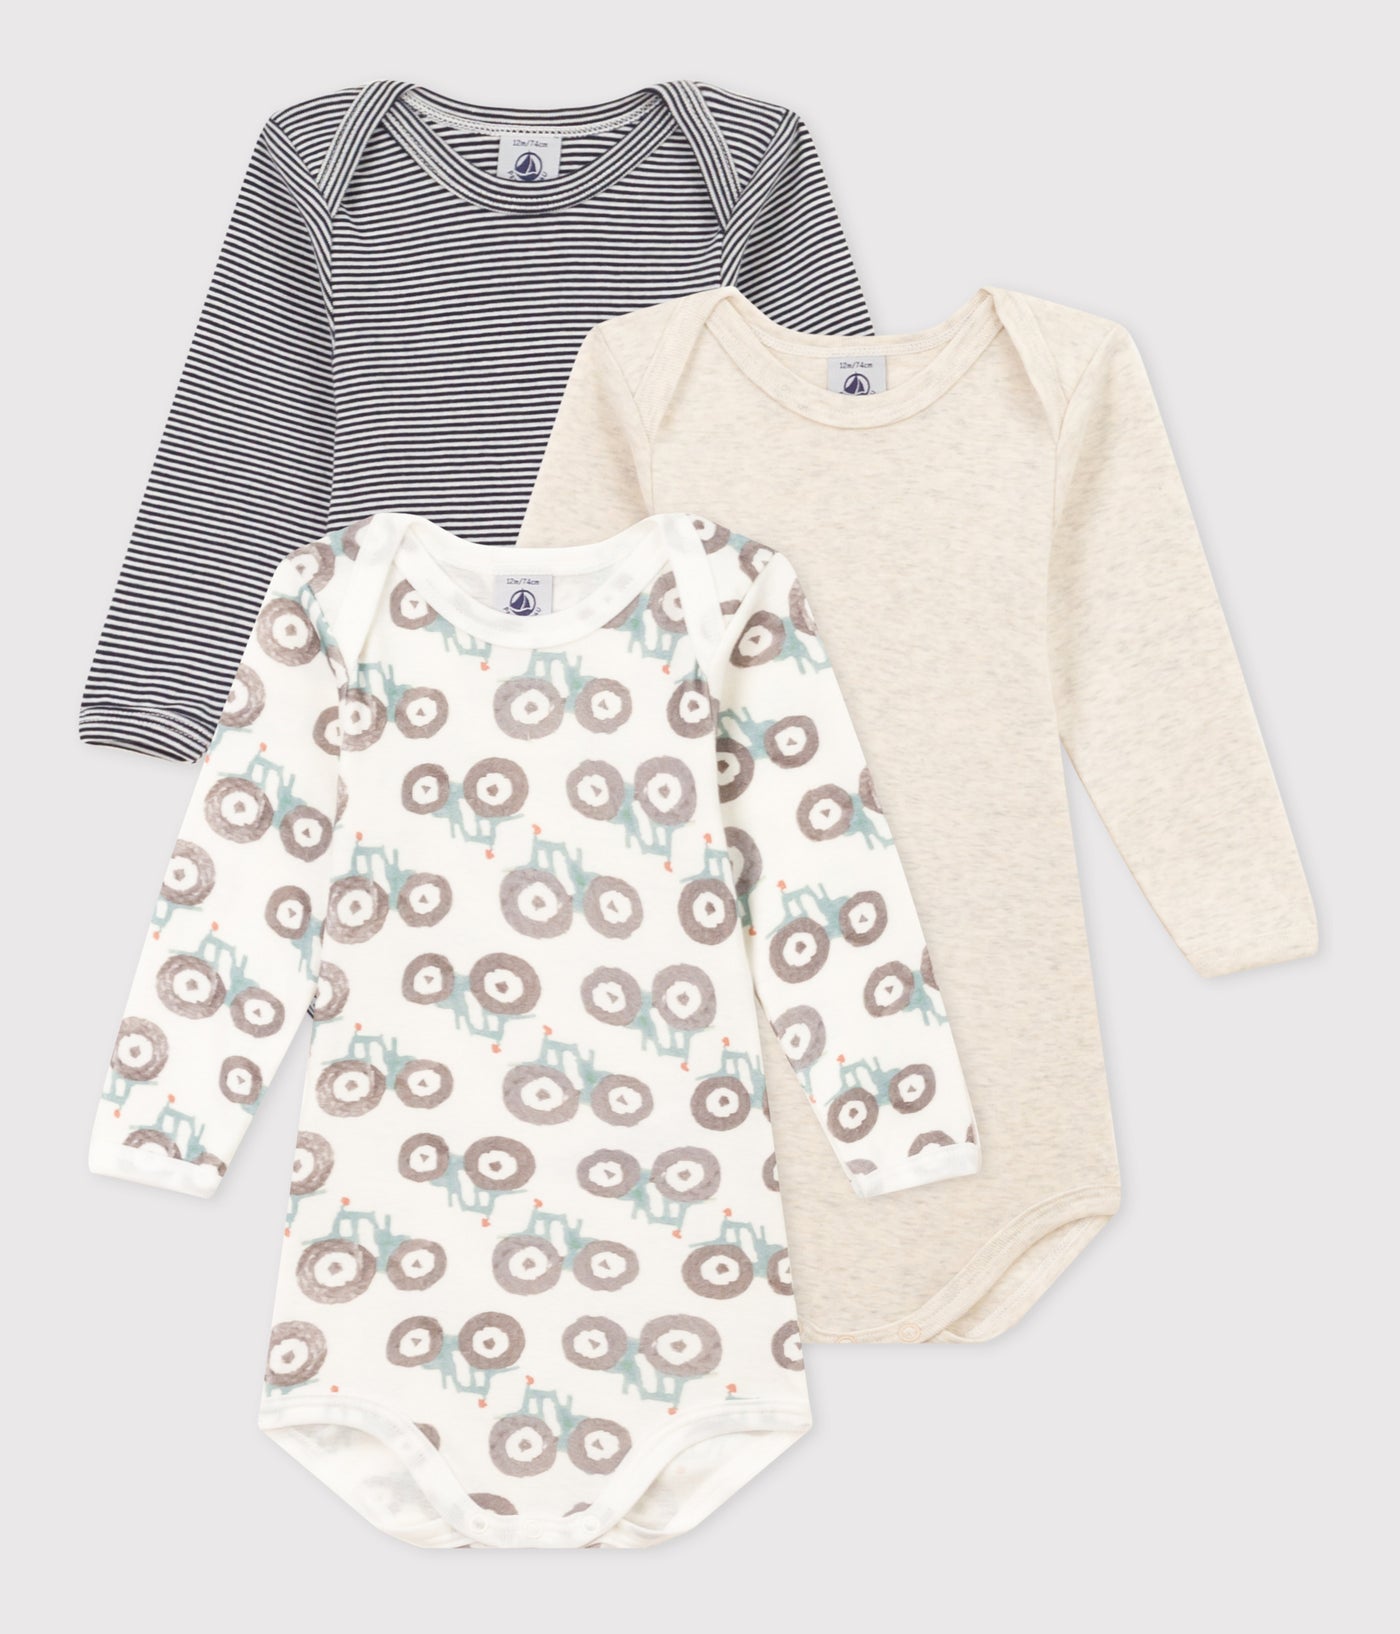 BABIES' TRACTOR PATTERNED LONG-SLEEVED COTTON BODYSUITS - 3-PACK